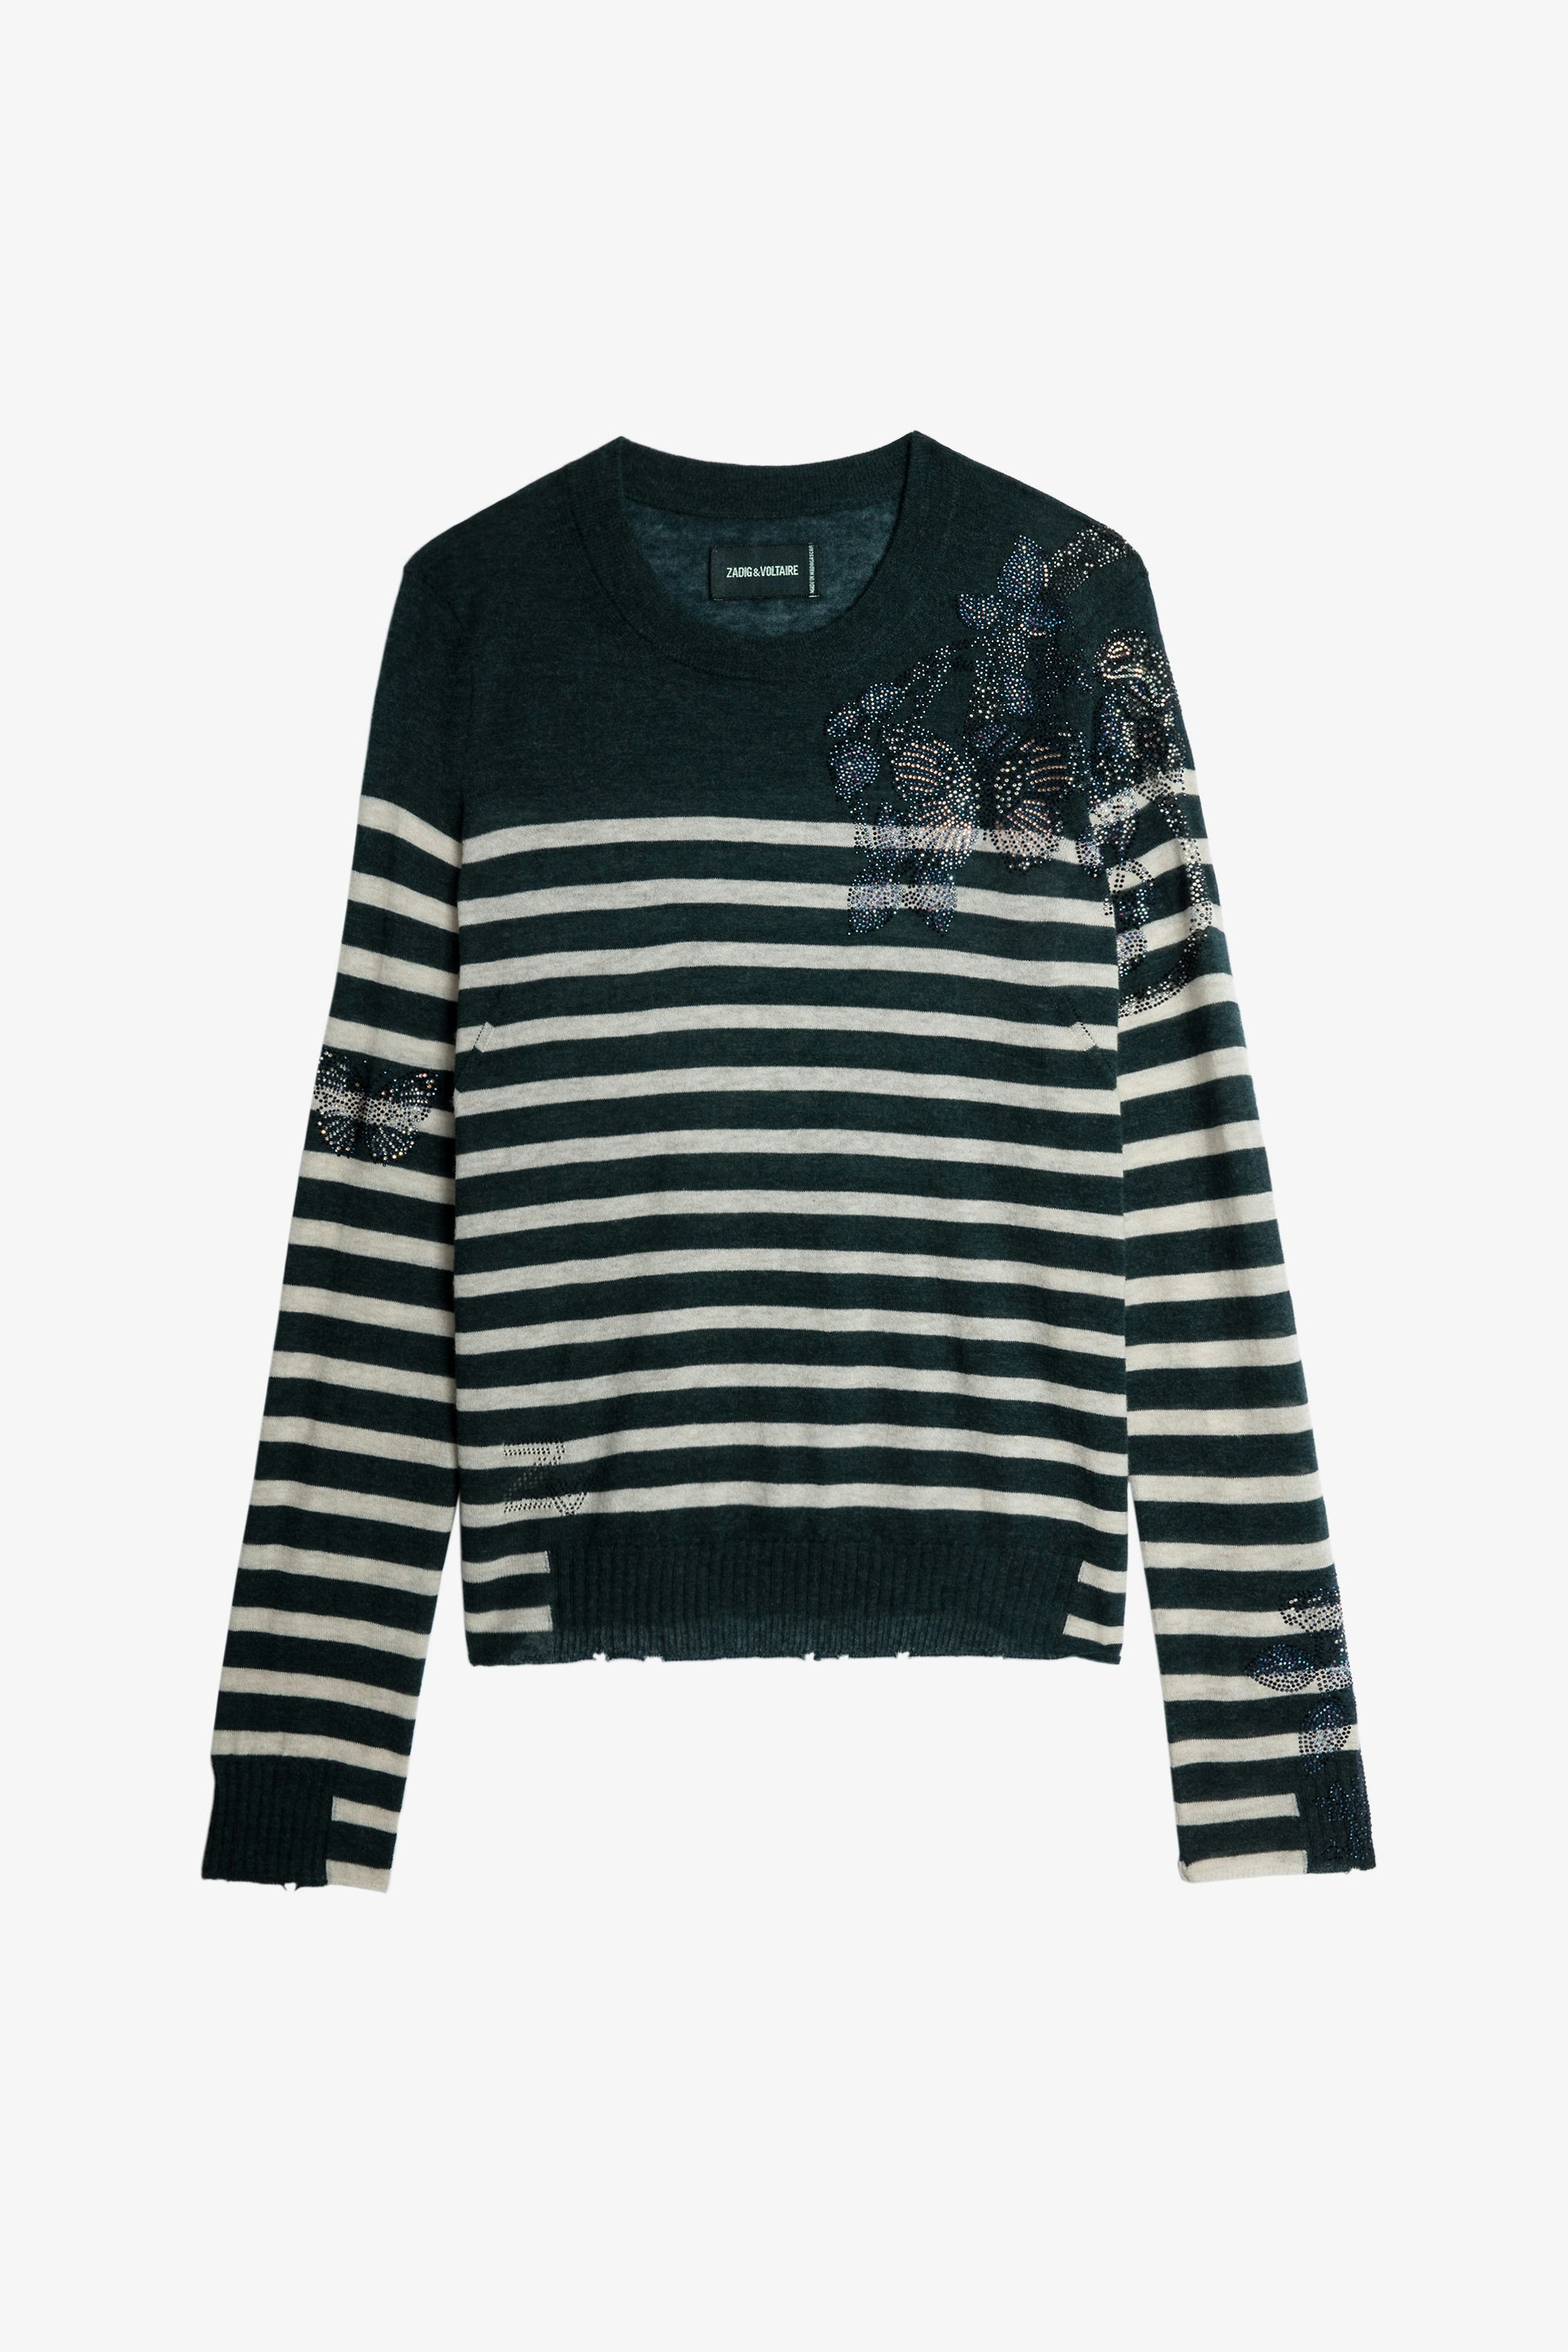 Source カシミヤ ニット Women's green cashmere jumper with contrasting stripes and crystal-embellished motif